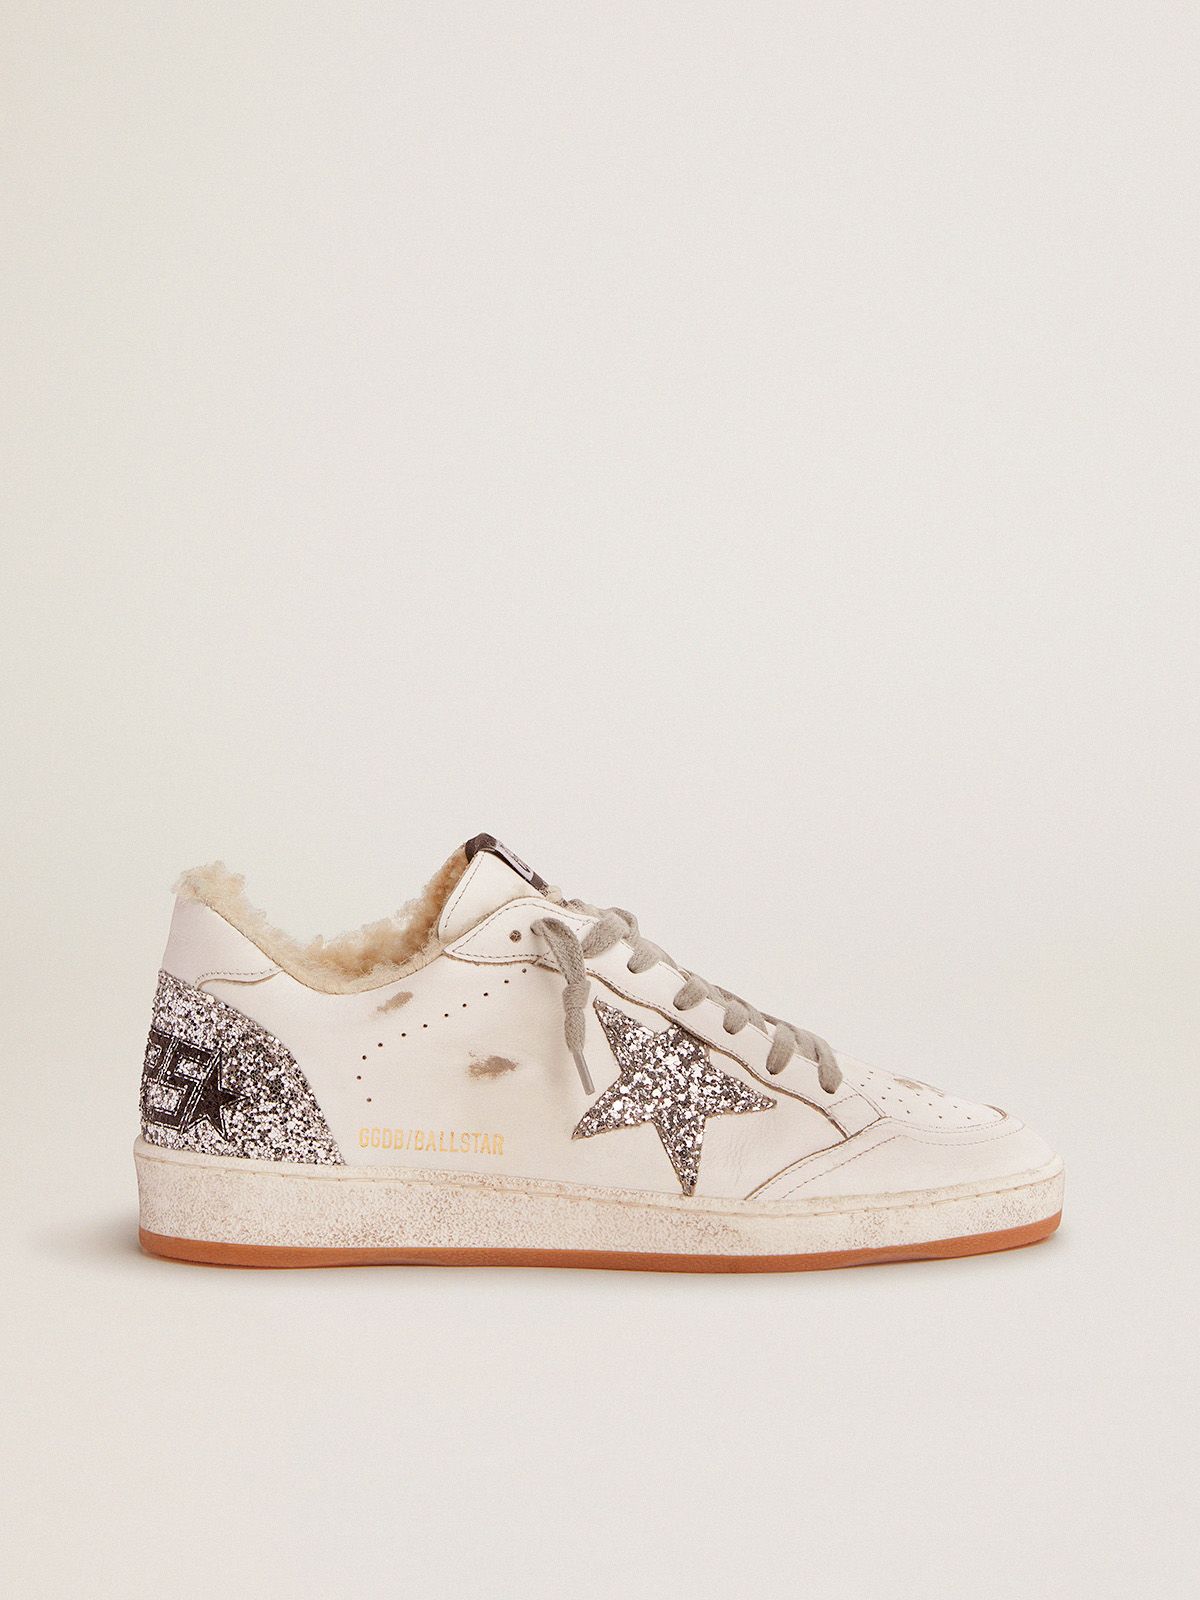 golden goose glitter lining and Ball with details sneakers silver Star white shearling in leather